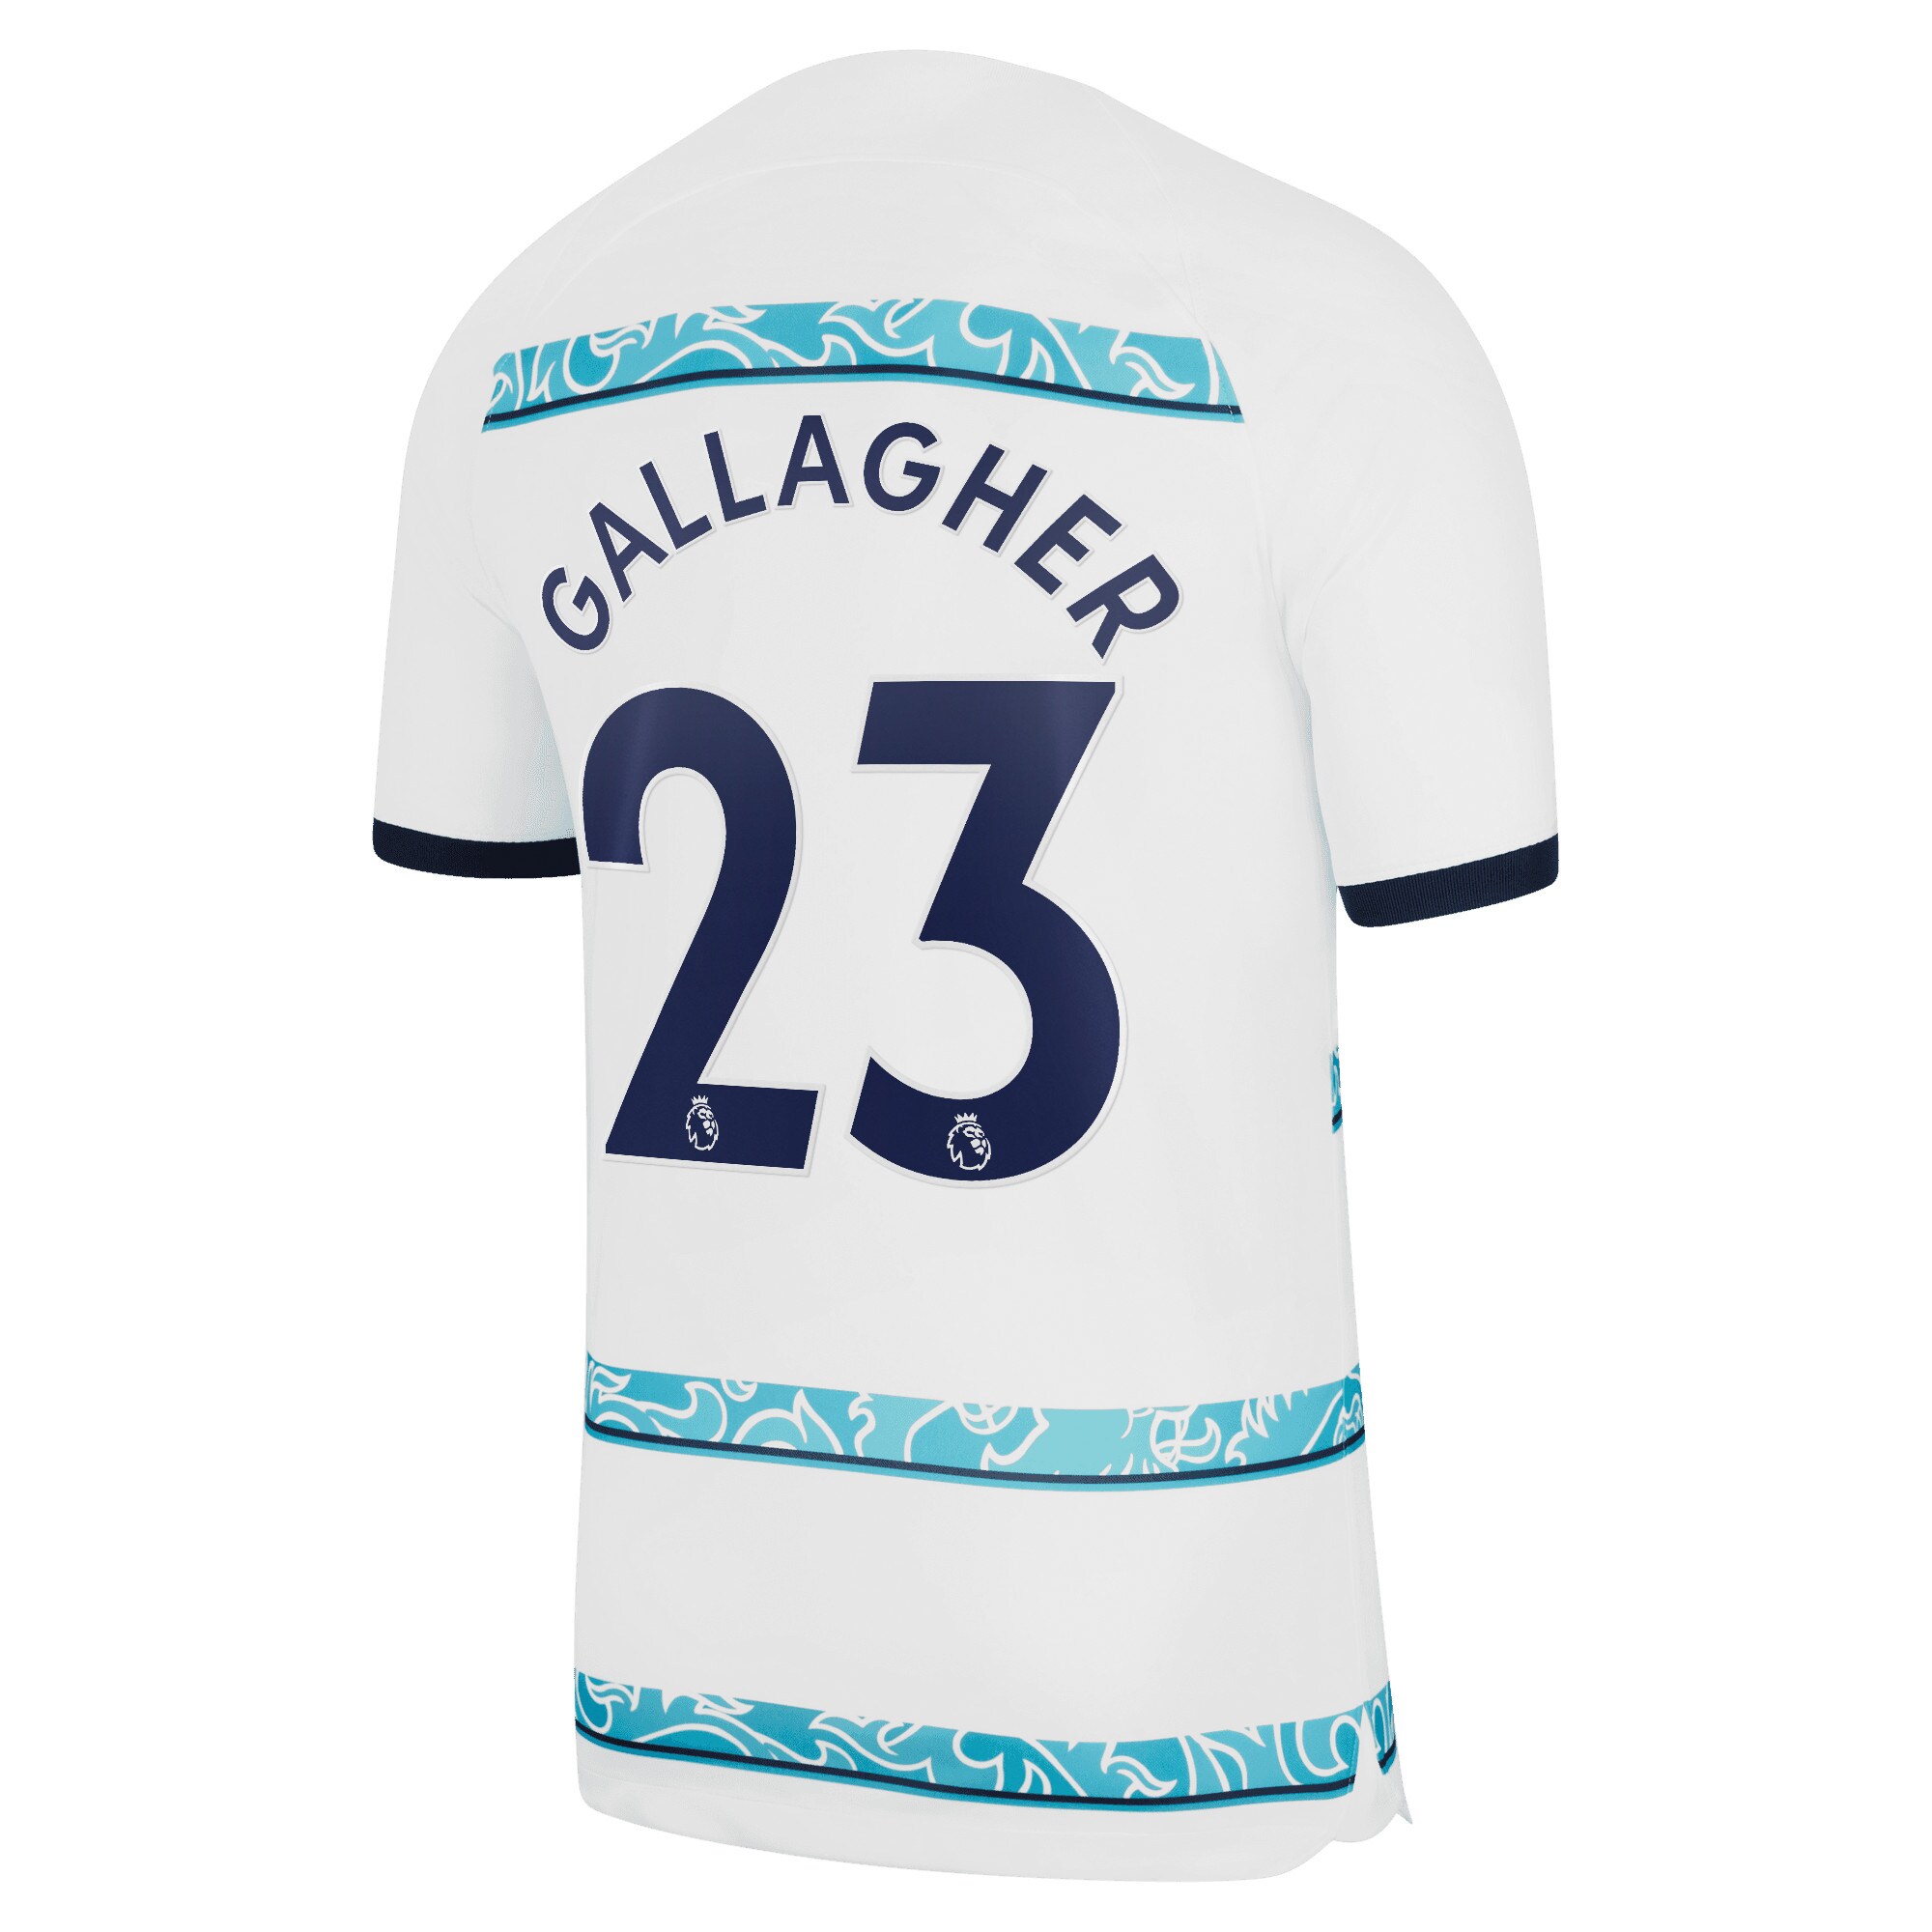 Chelsea Away Stadium Shirt 2022-23 with Gallagher 23 printing